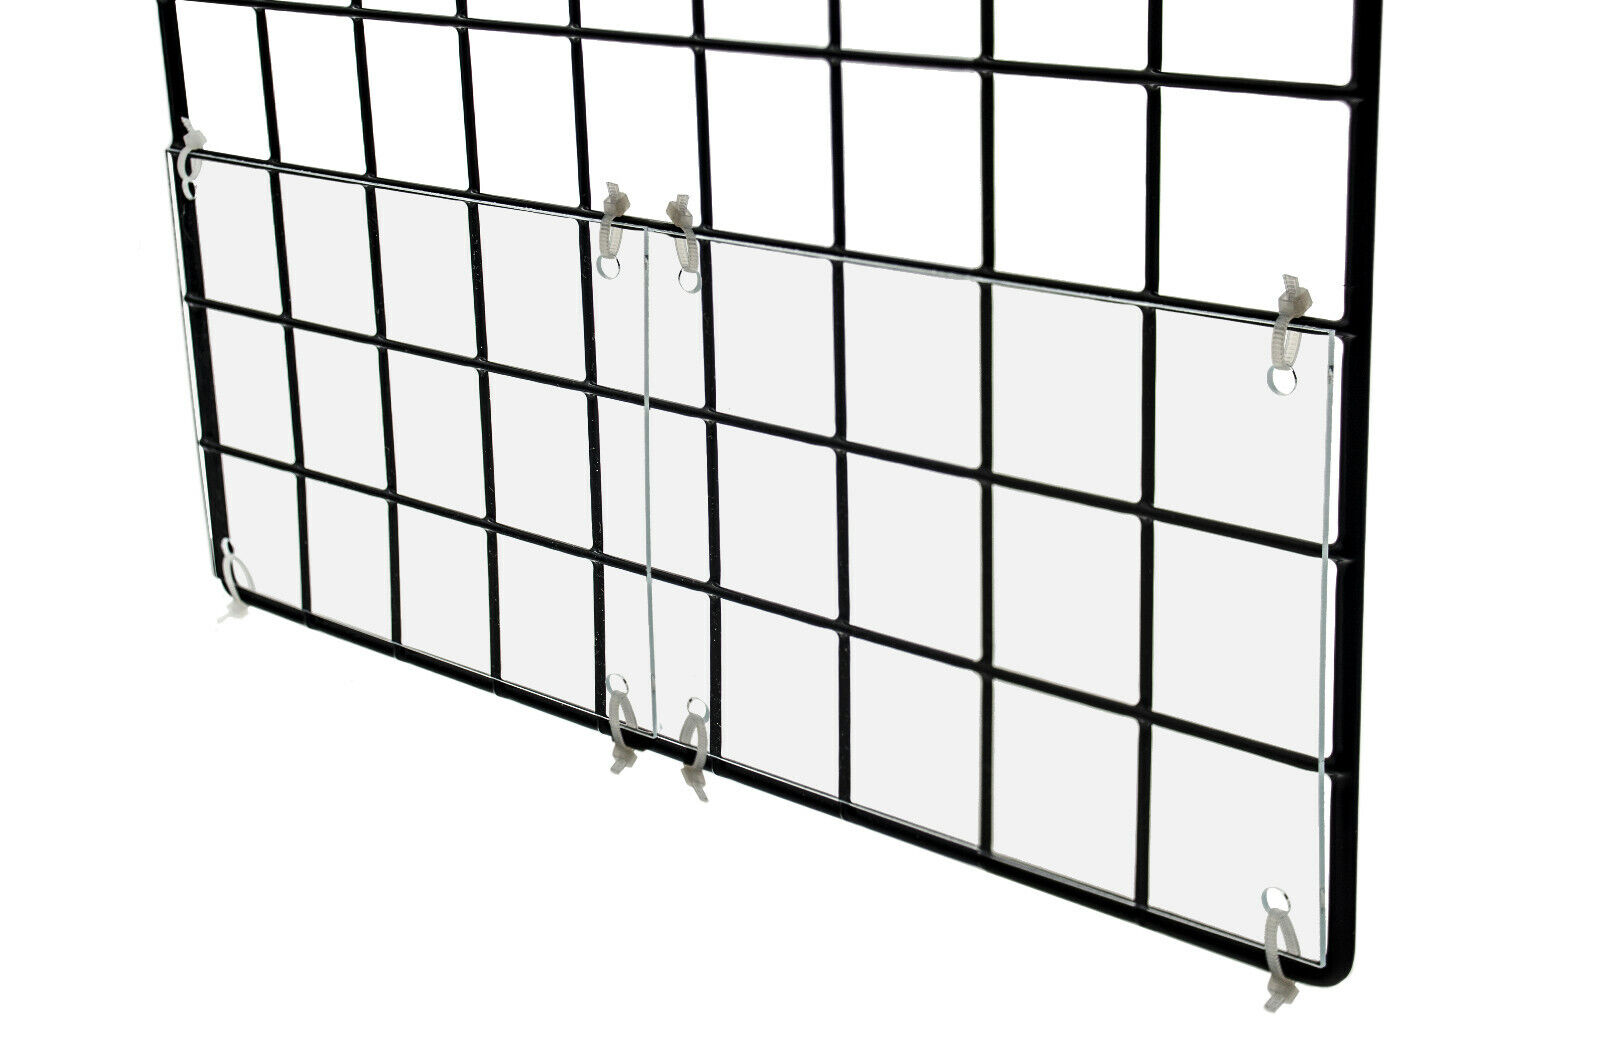 Pet Cage Small Urine Guard Protective Shield Side Lining 6"W x 4.5"H Lot of 24 Marketing Holders Pet Cage Small Urine Guard Protective Shield - фотография #2